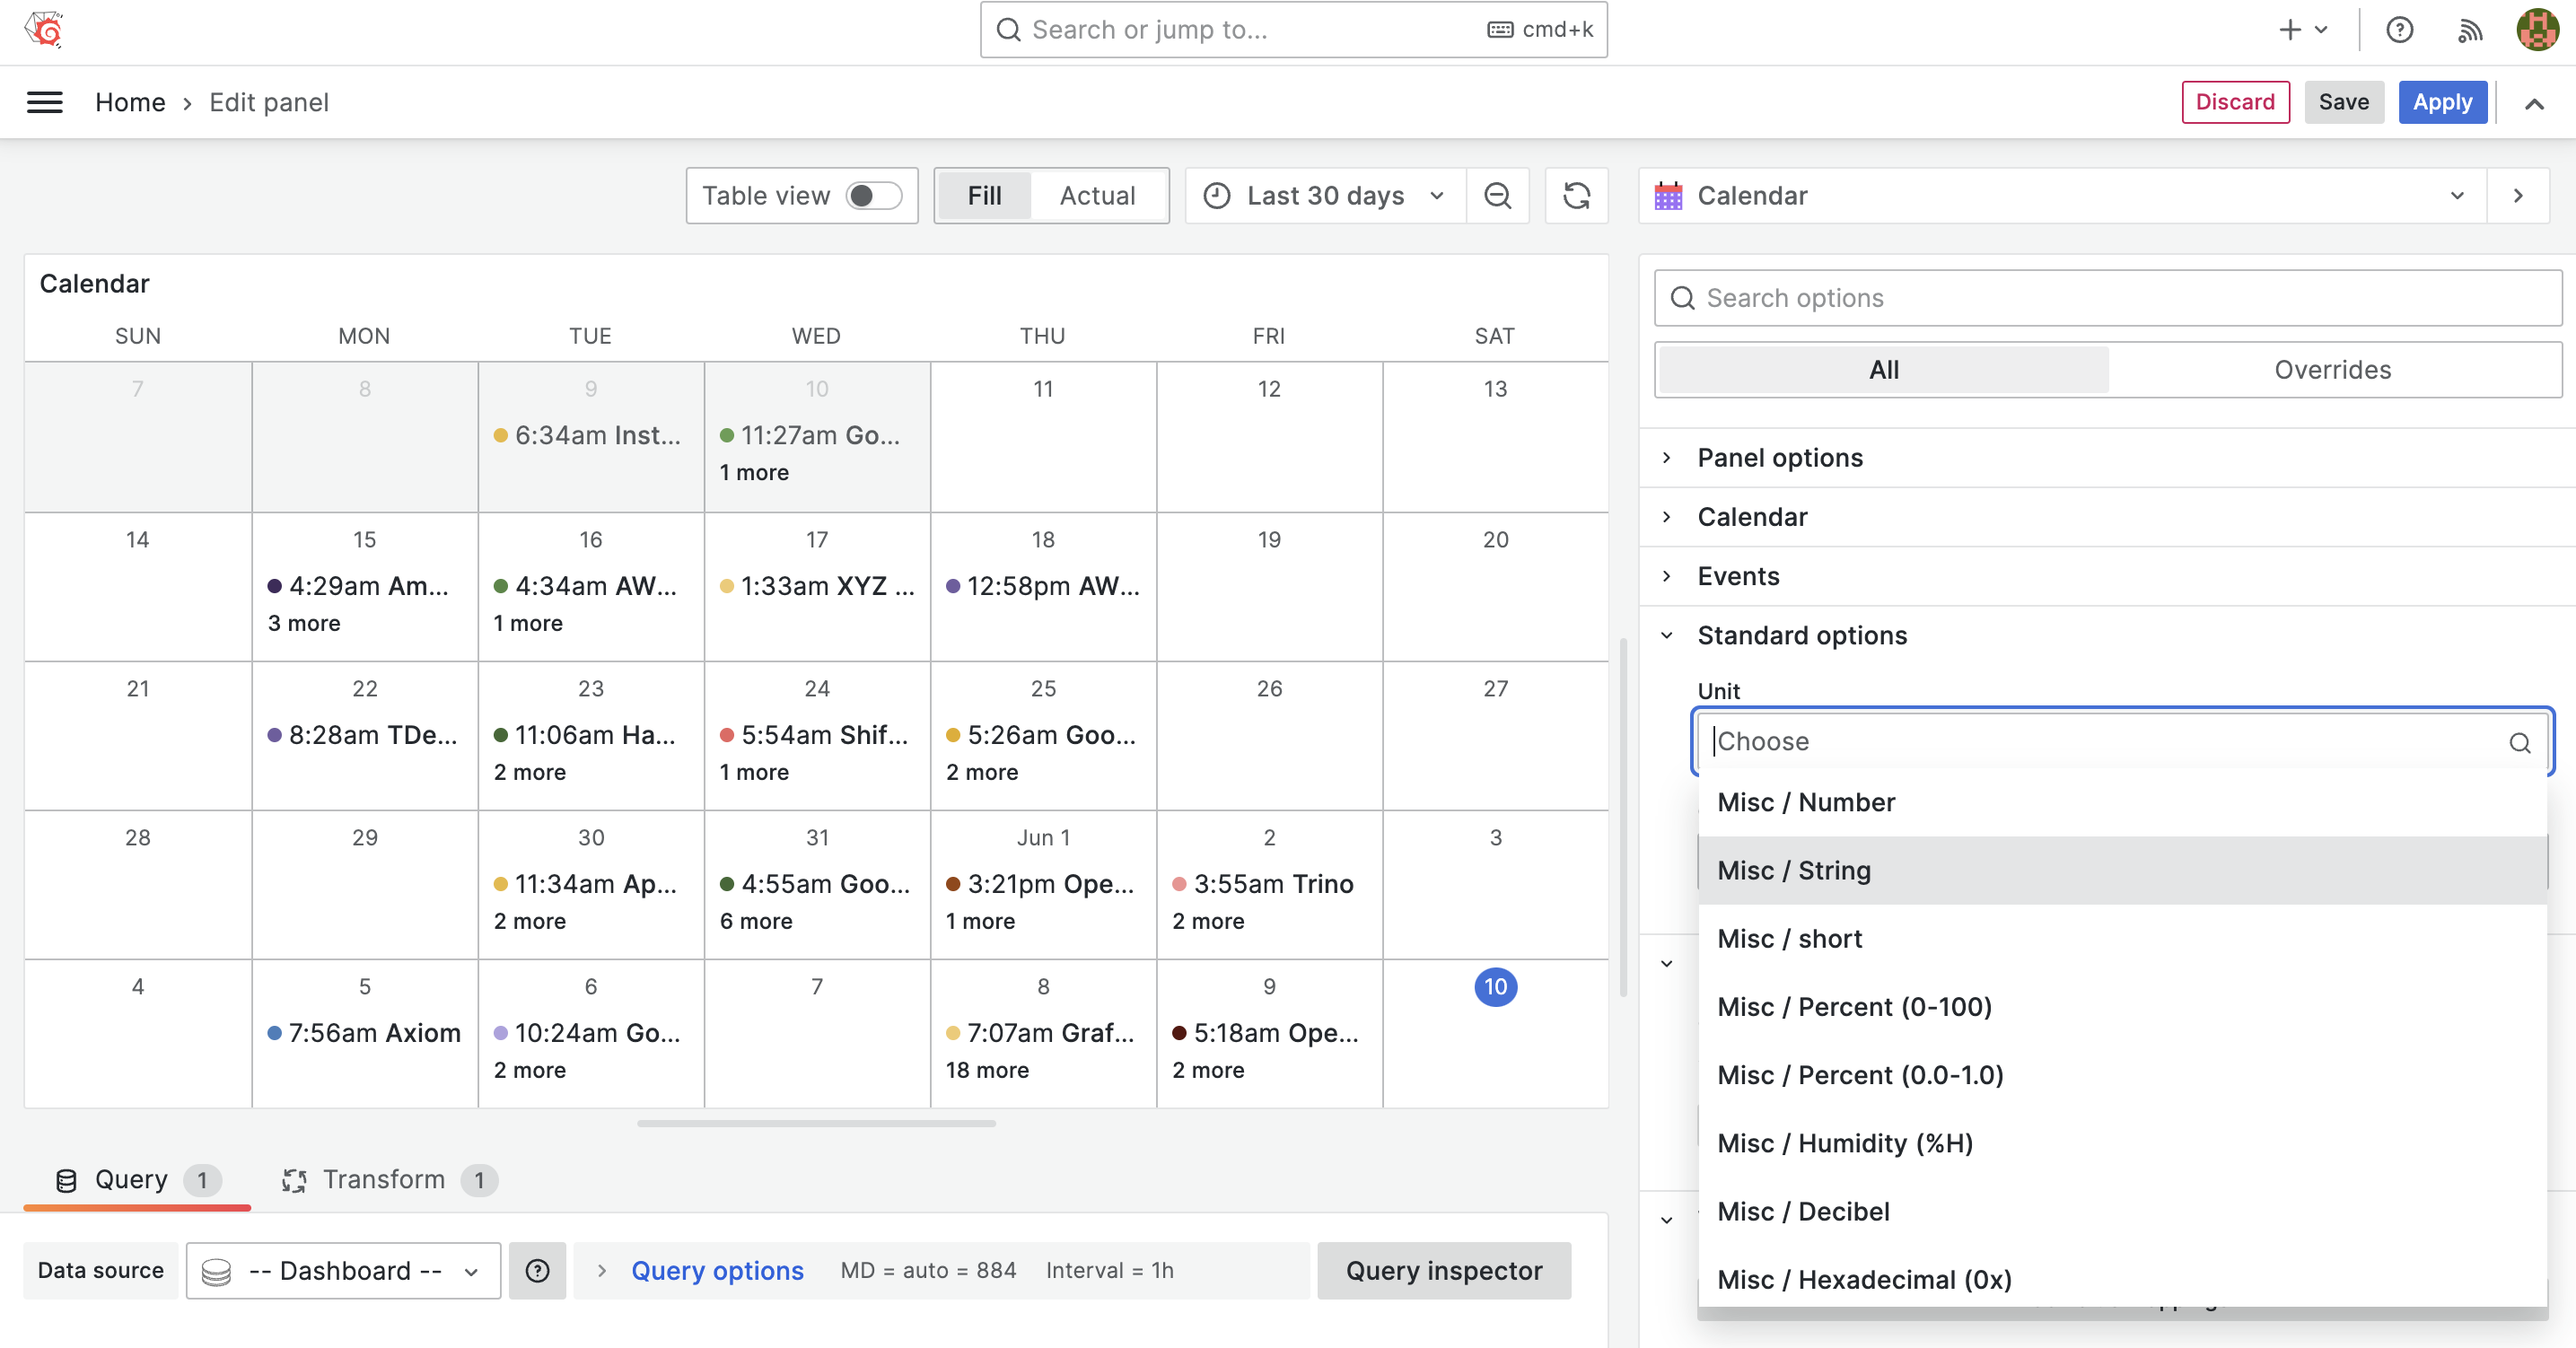 Units, value mappings, and overrides are supported in Calendar Panel.